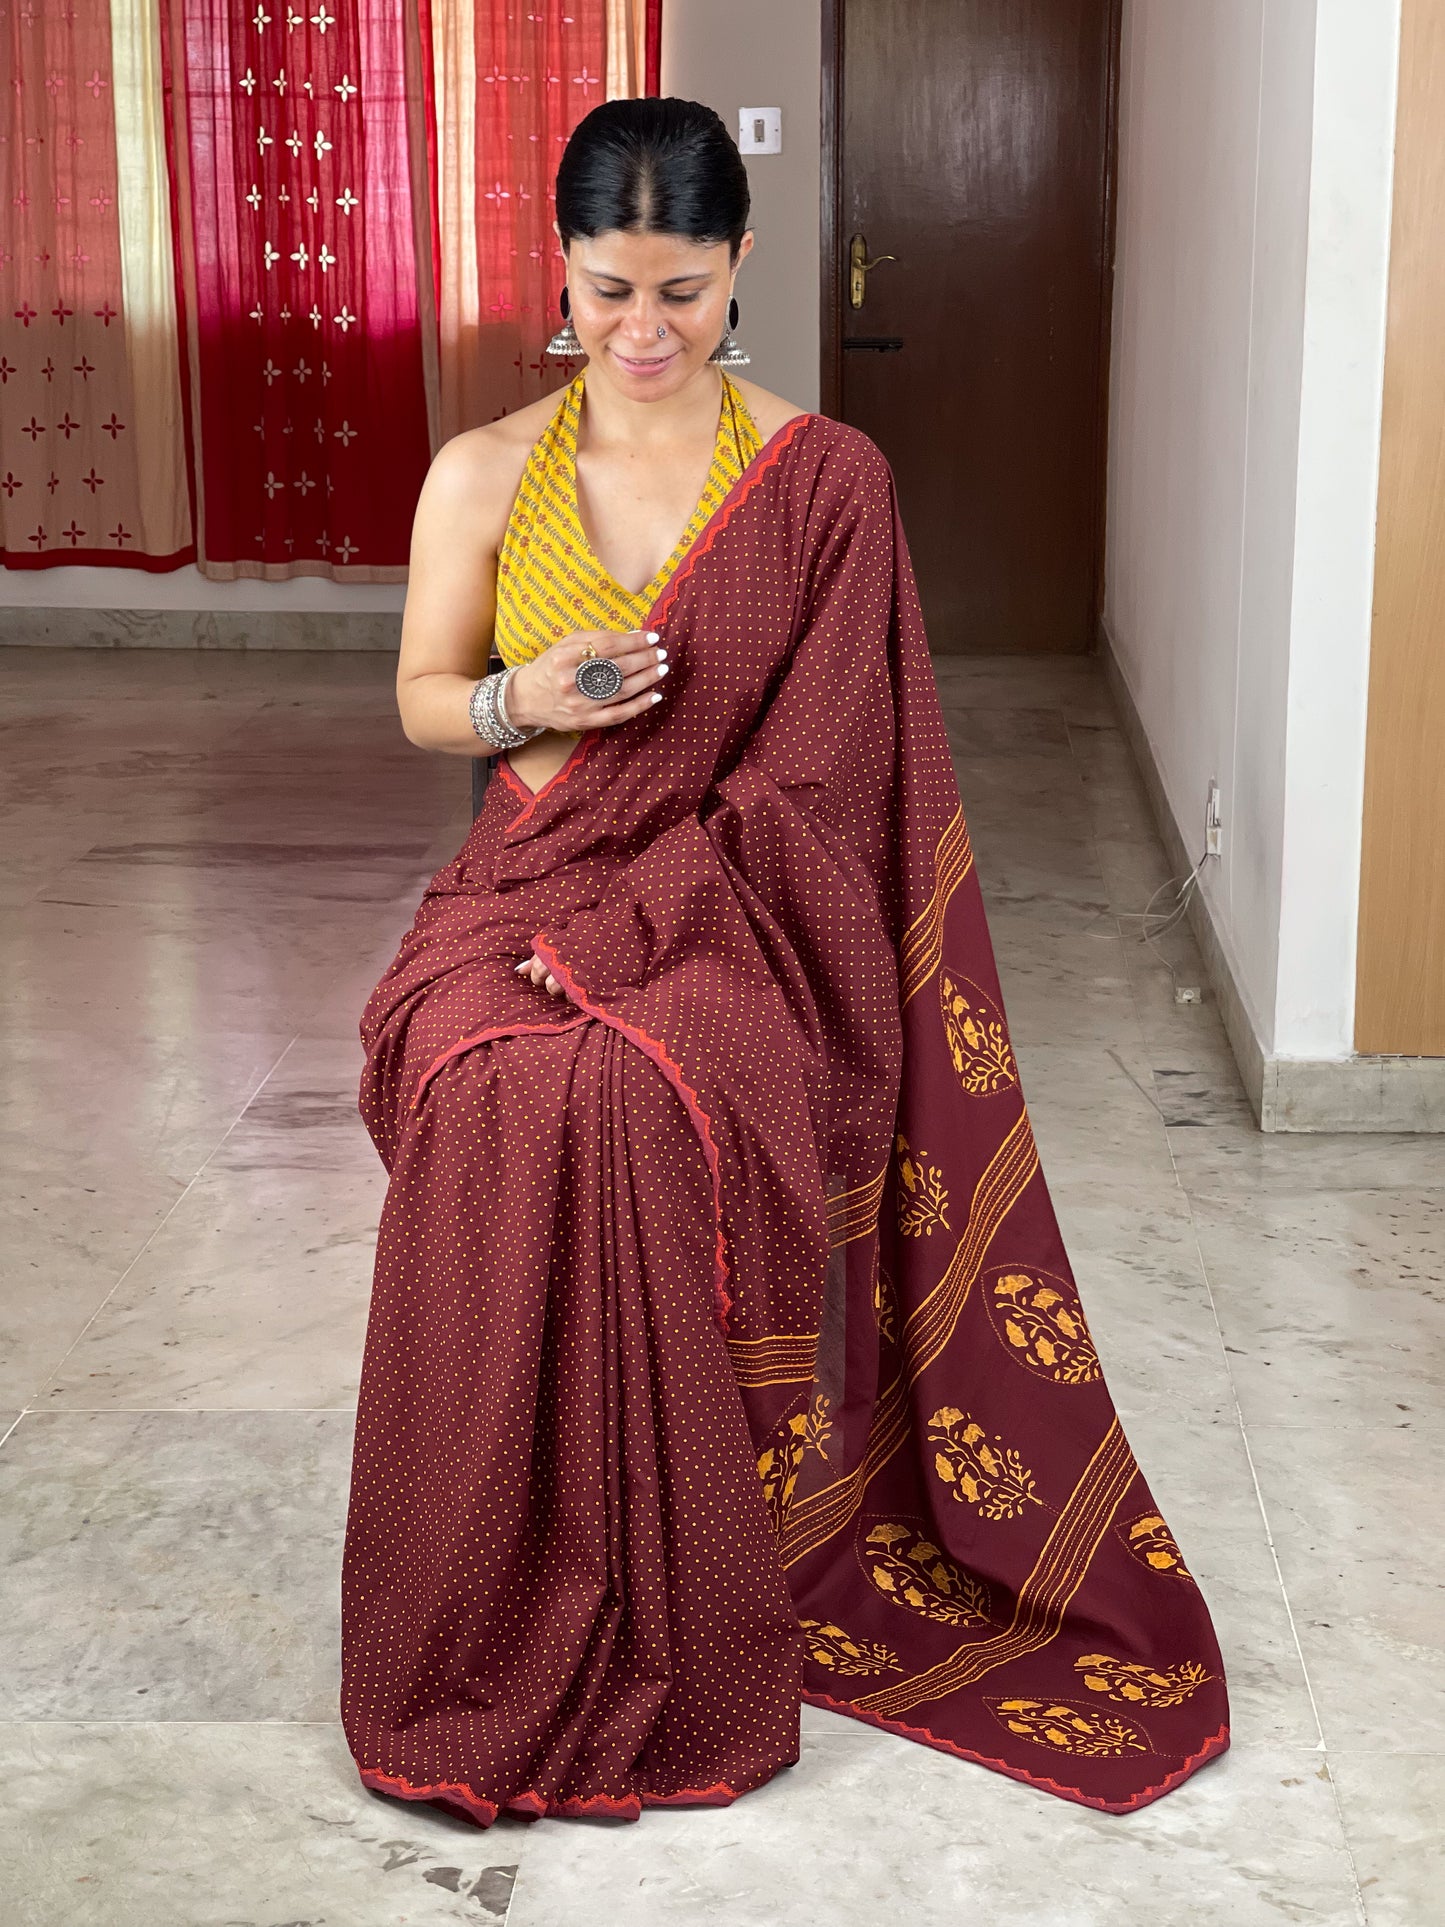 Handloom Cotton Sarees in handblock printed with hand embroidered appliue/cut work